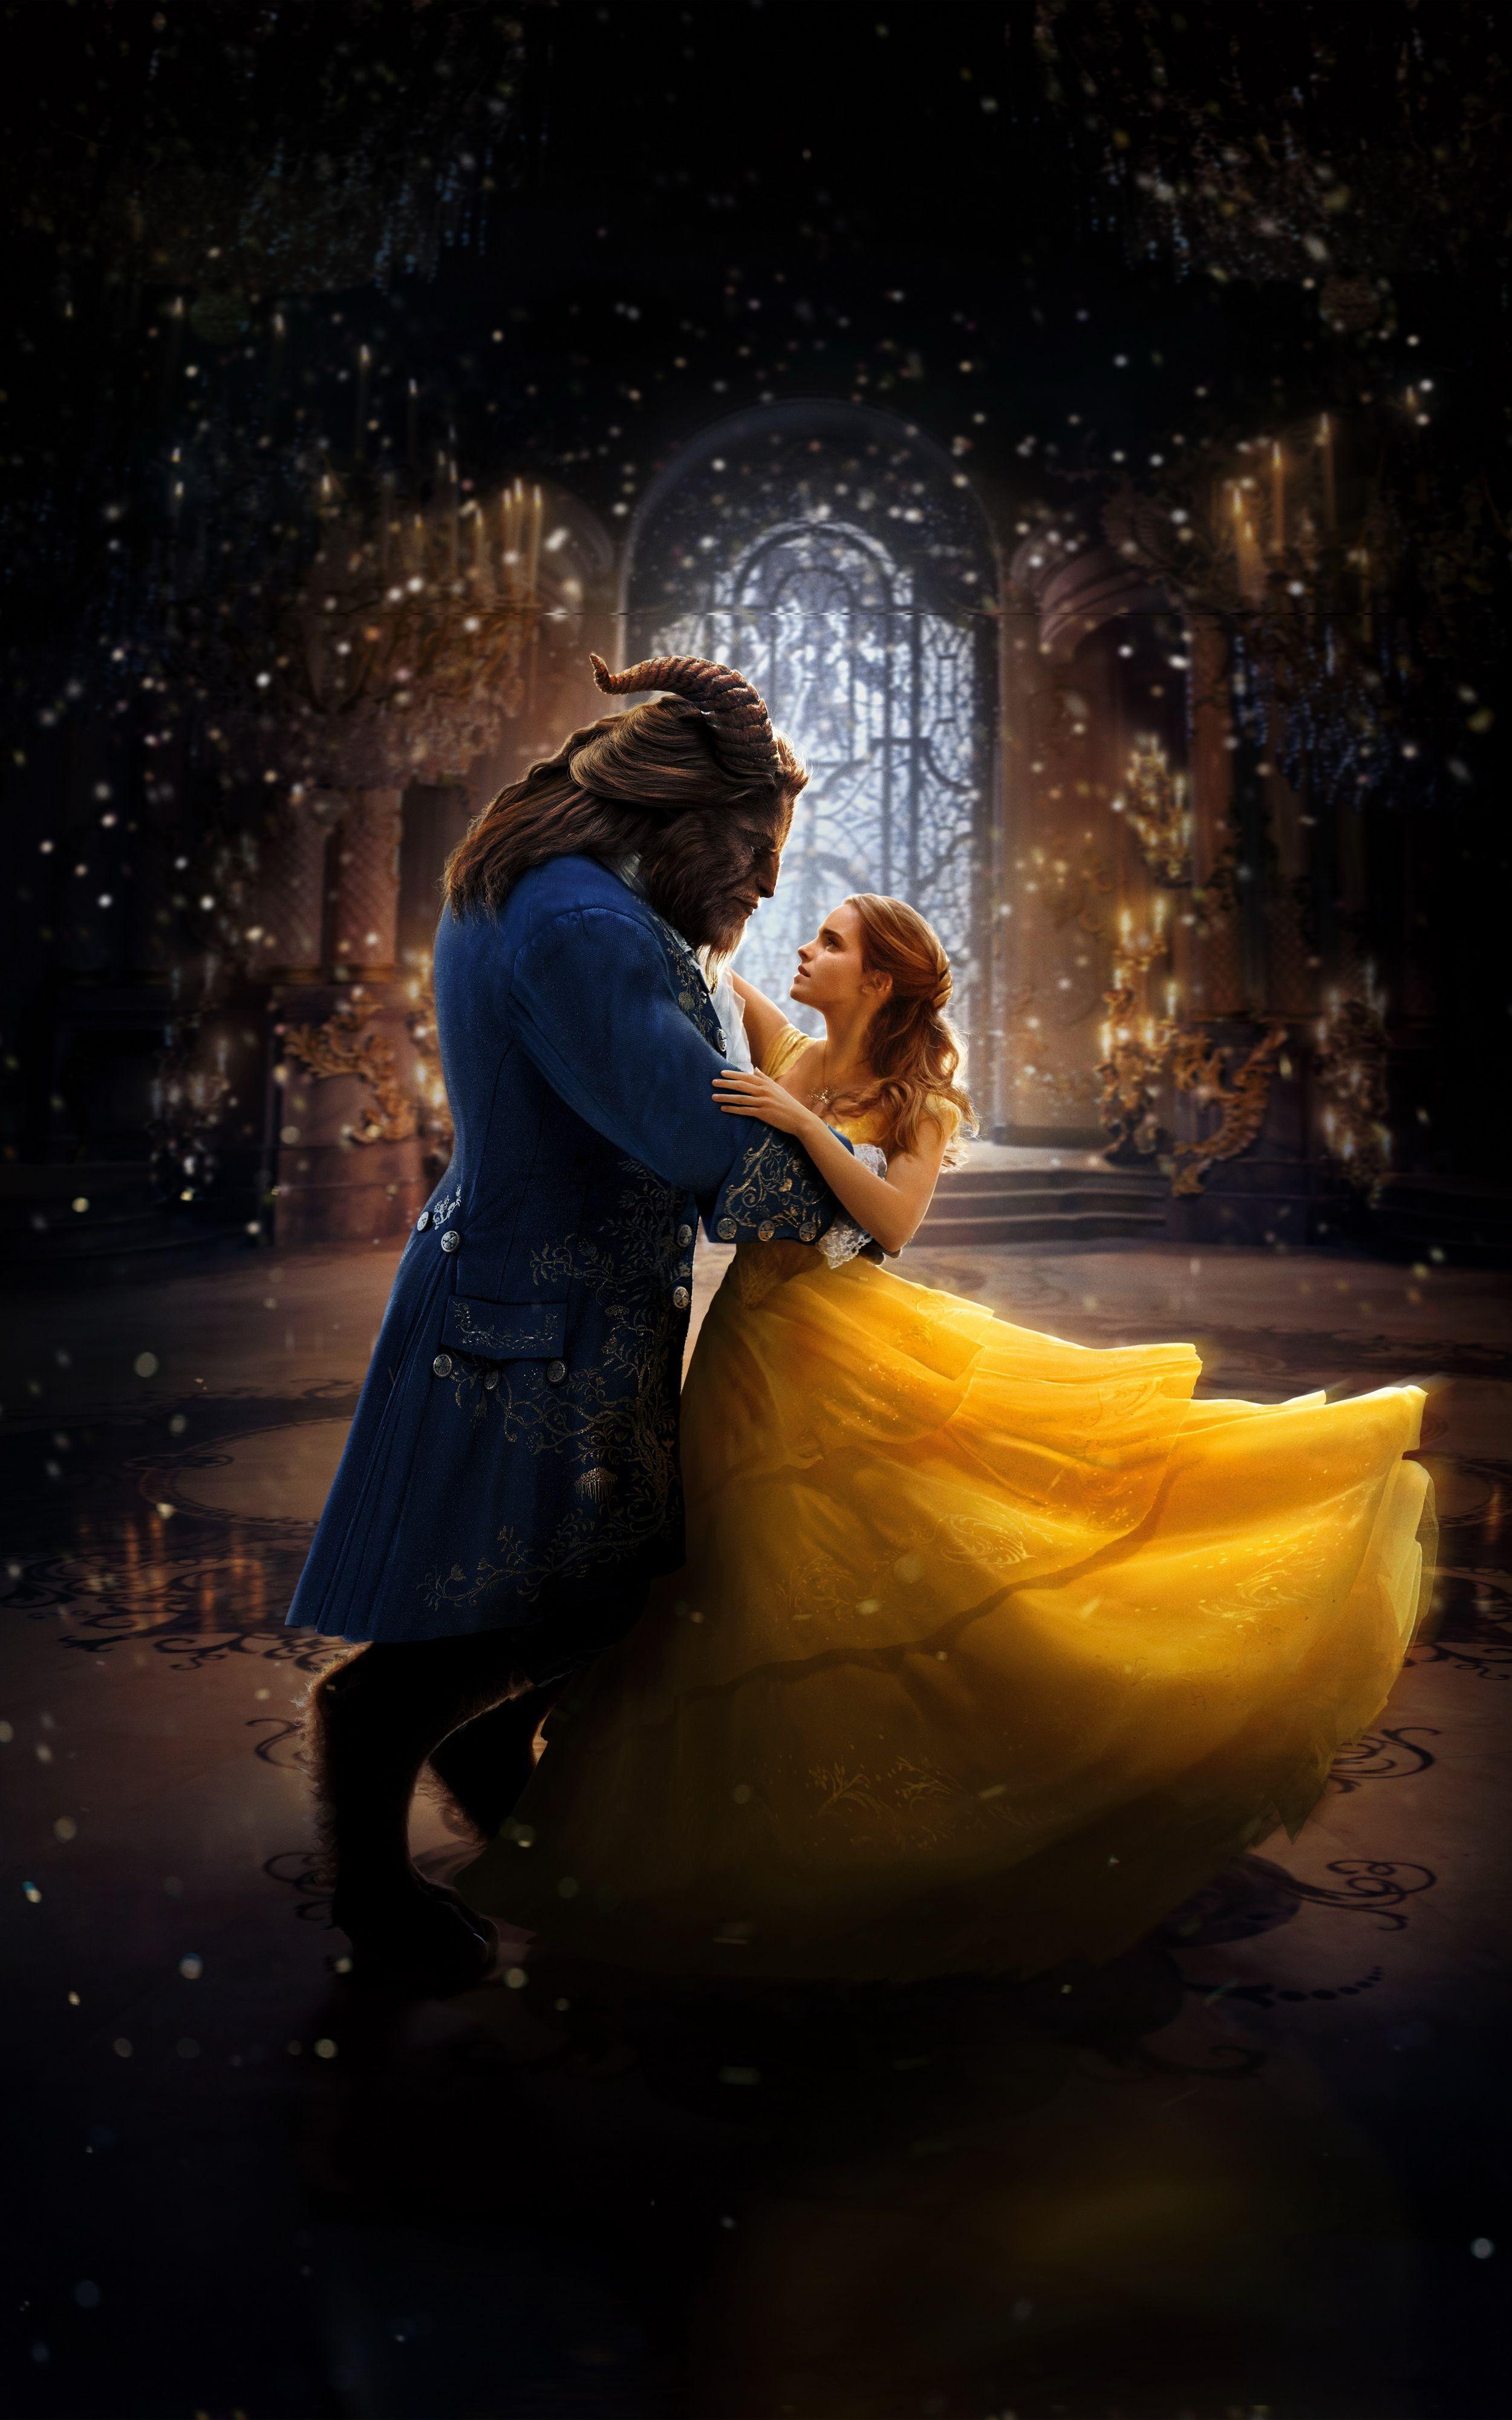 Beauty And The Beast Iphone Wallpapers Top Free Beauty And The Beast Iphone Backgrounds Wallpaperaccess